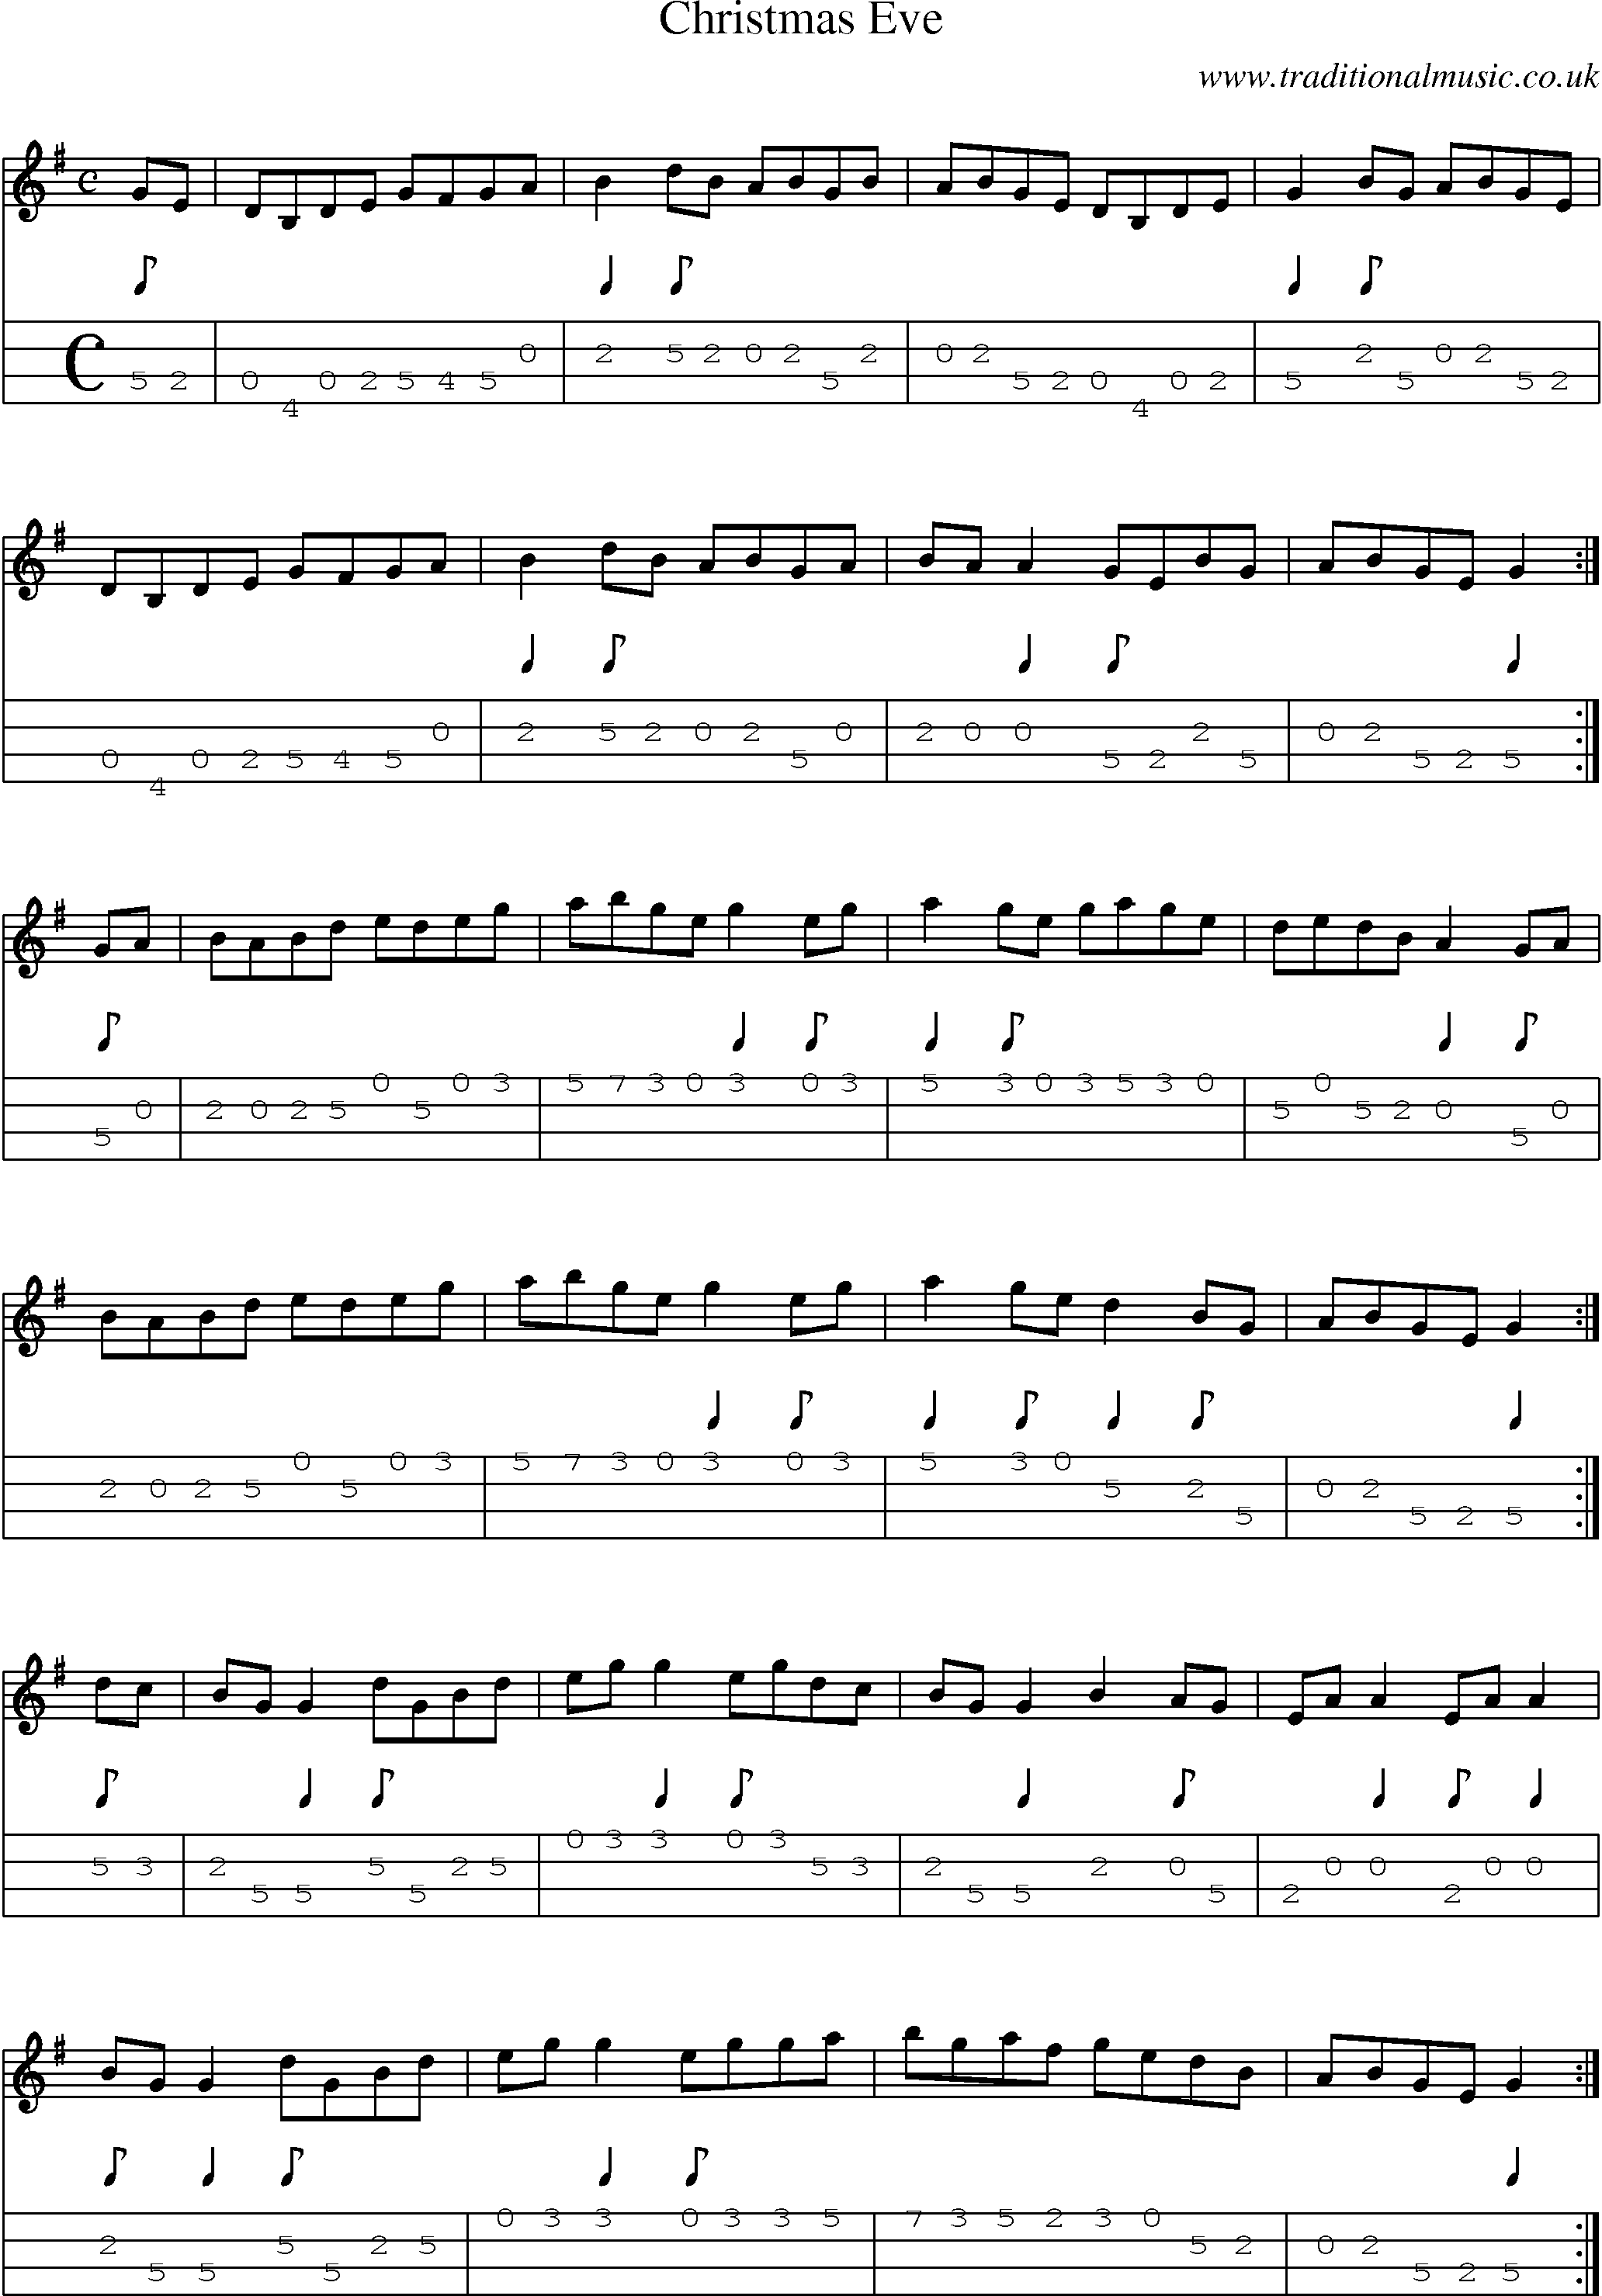 Music Score and Mandolin Tabs for Christmas Eve